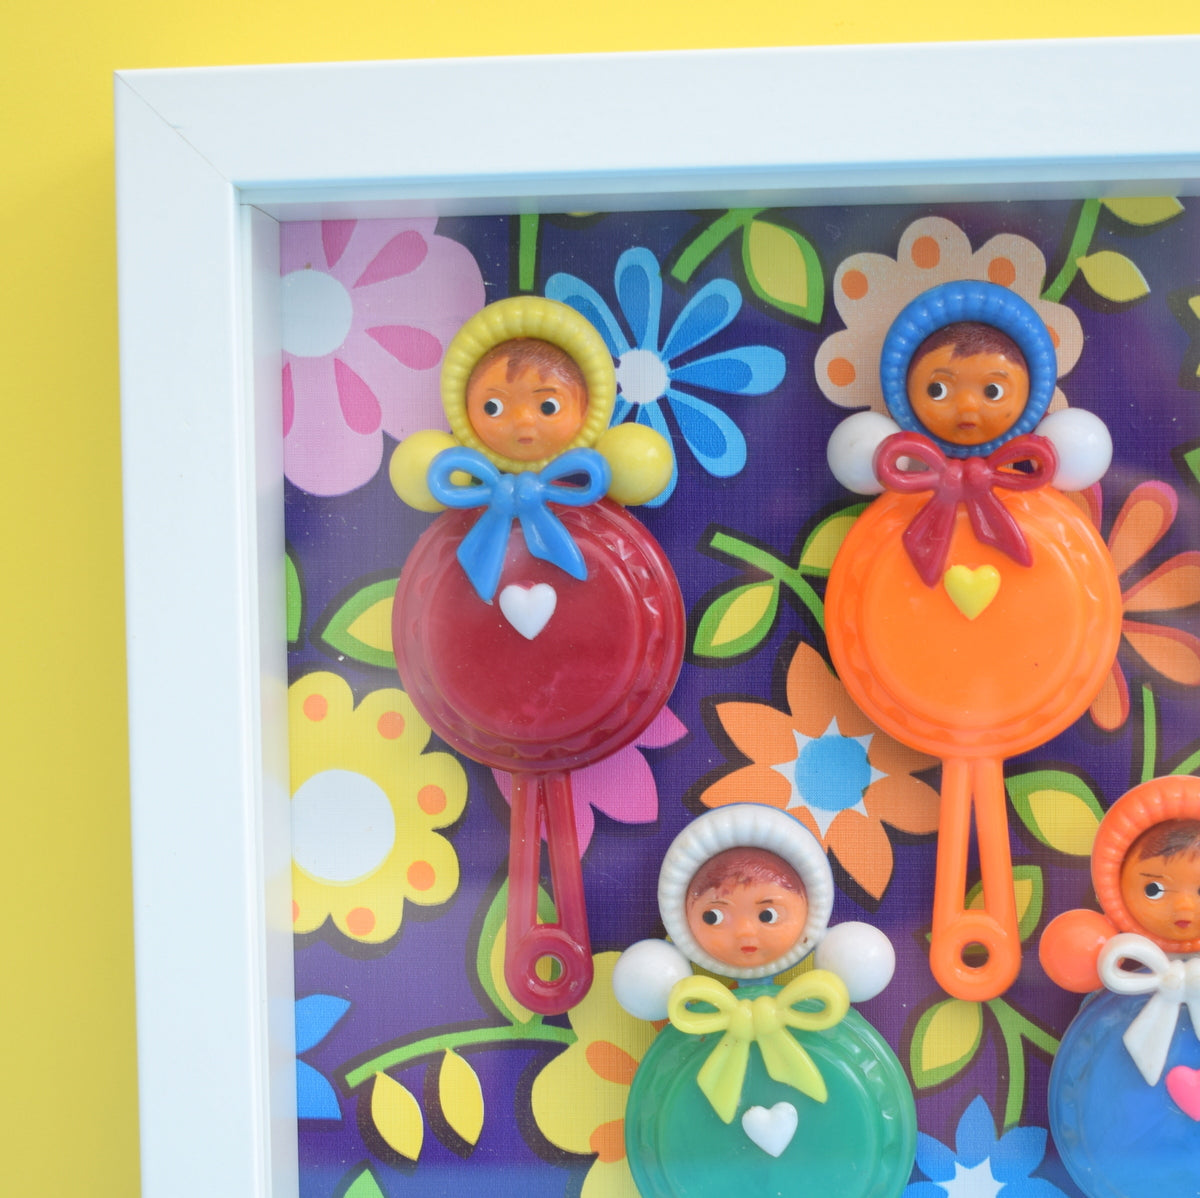 Vintage 1960s Plastic Doll Rattles Box Framed Picture -  Nevalyashka (Russian) Style - Flower Power